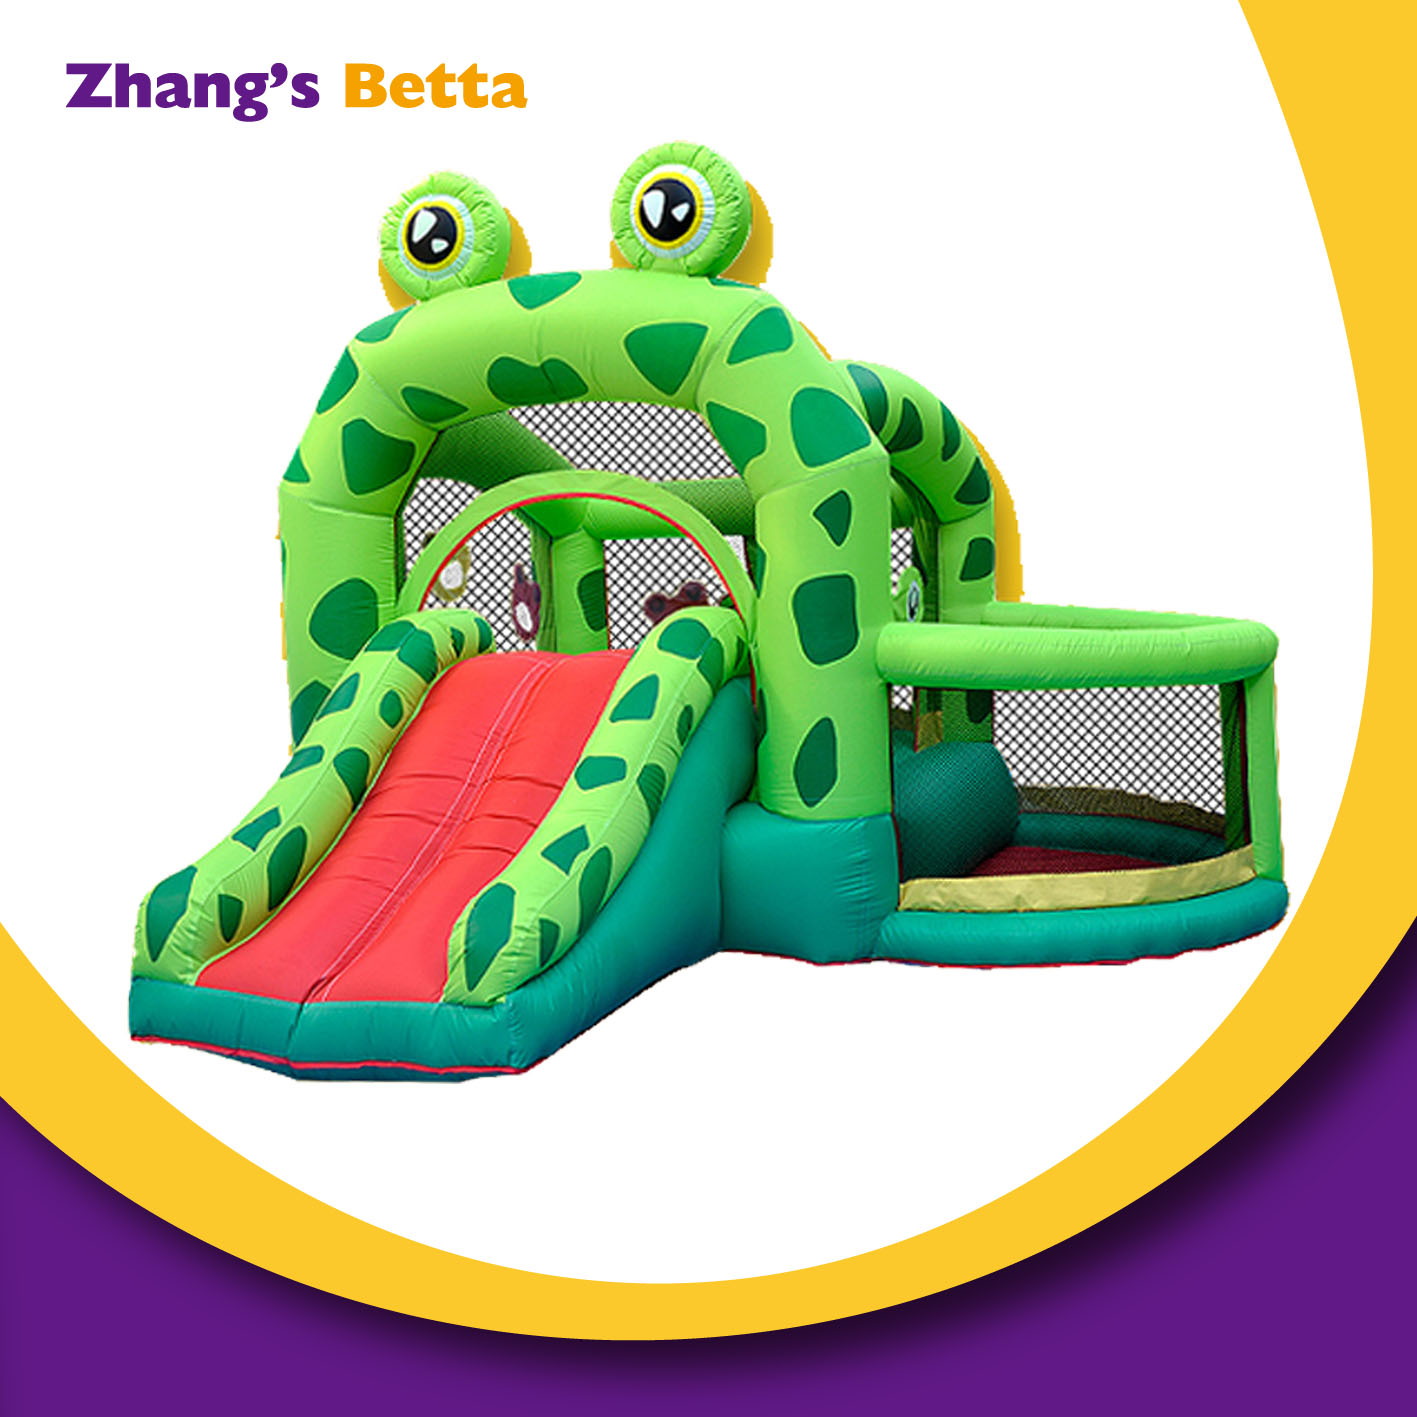 Kids Cartoon Frog Jumping House with Slide